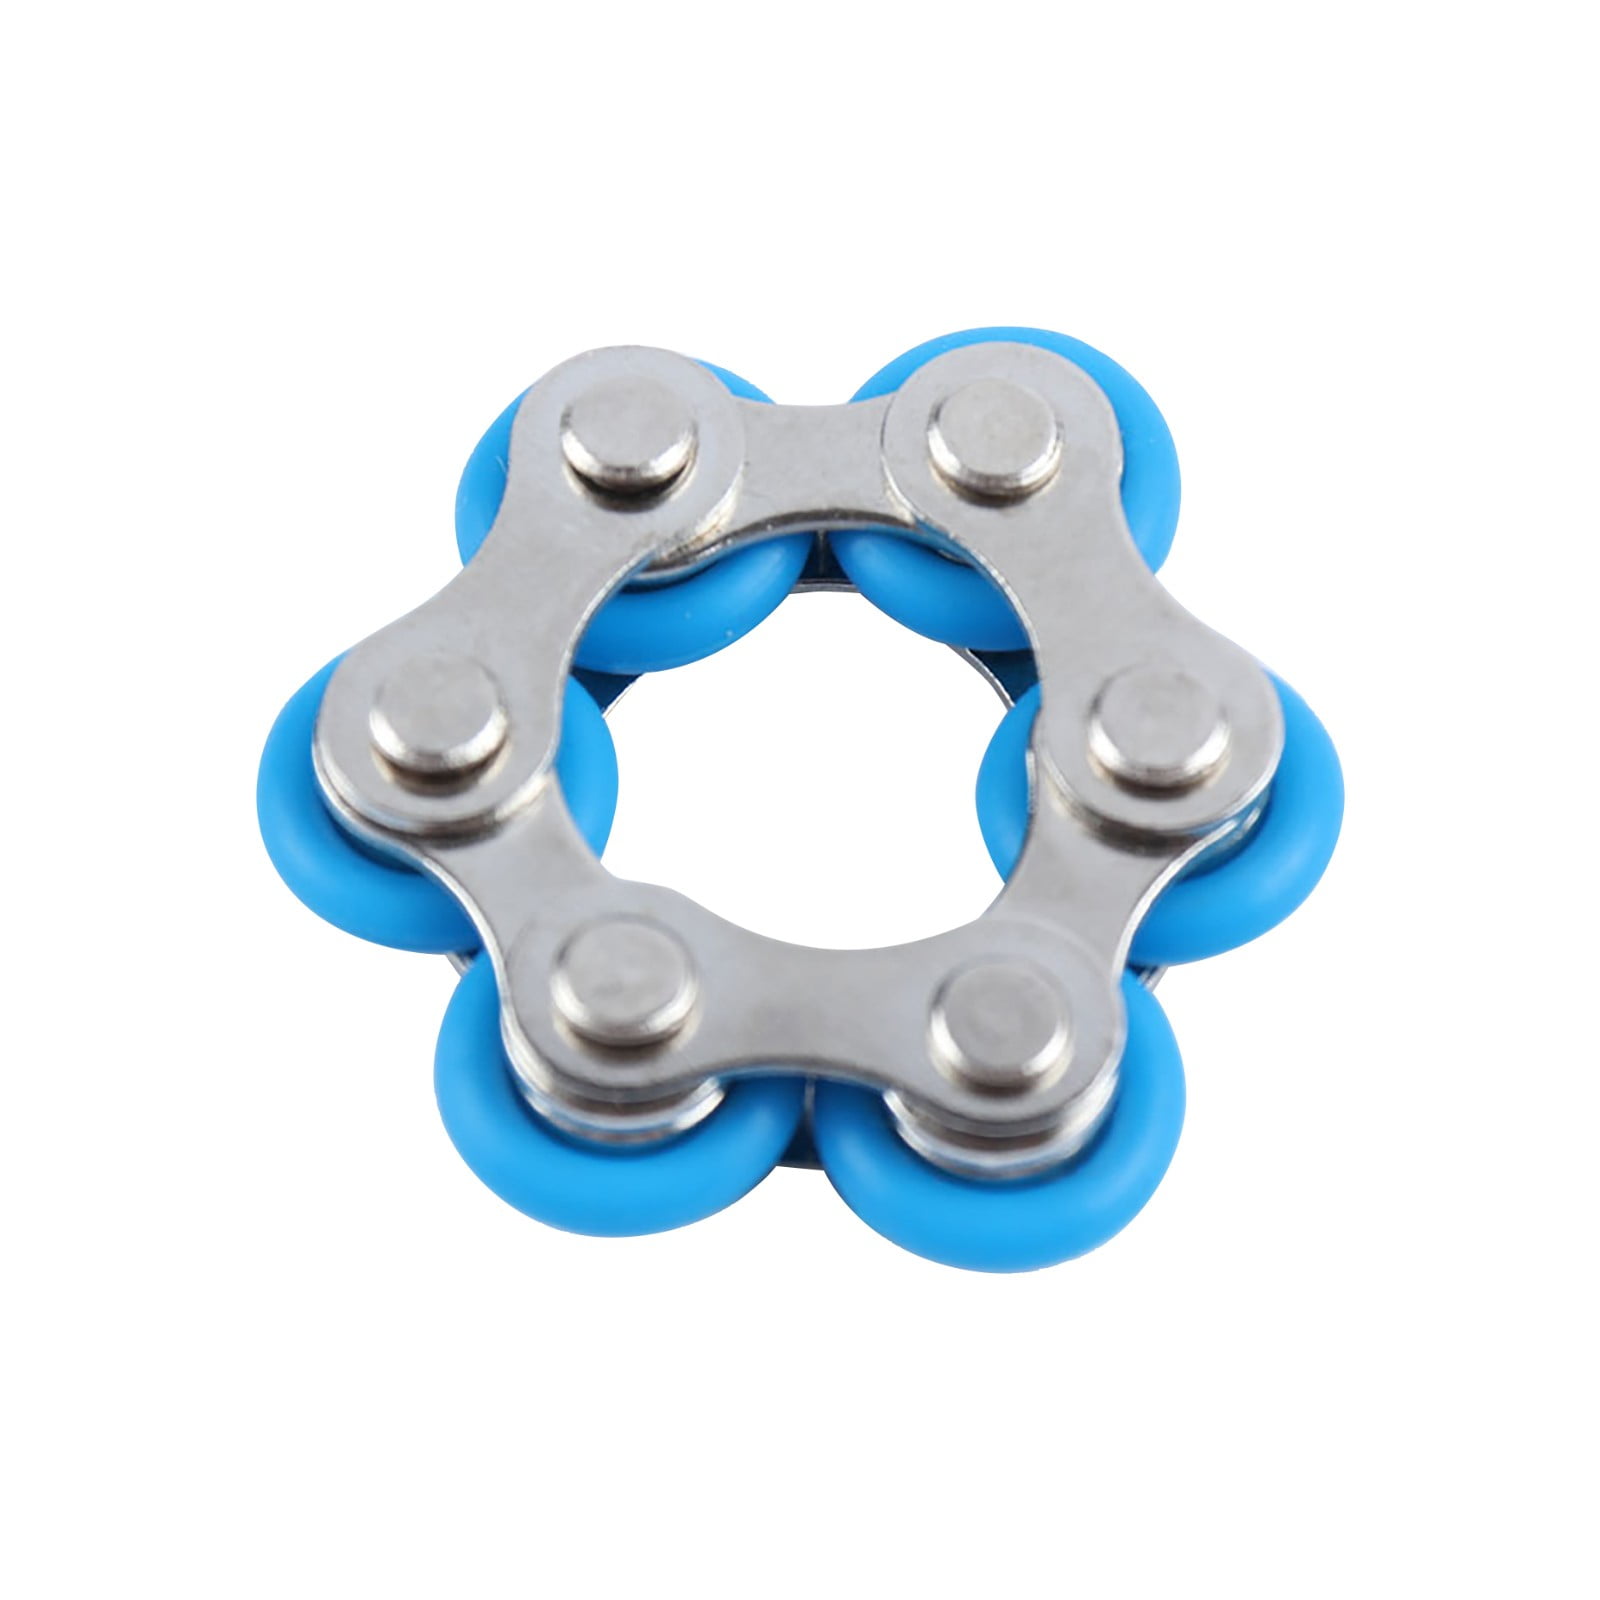 Blue School Stress Relief Perfect for ADHD Kids Stocking Stuffers Gifts for Children or Adults ADD Anxiety in Classroom Work for Students Office Fidget Toys Flippy Roller Chain 3 Piece 